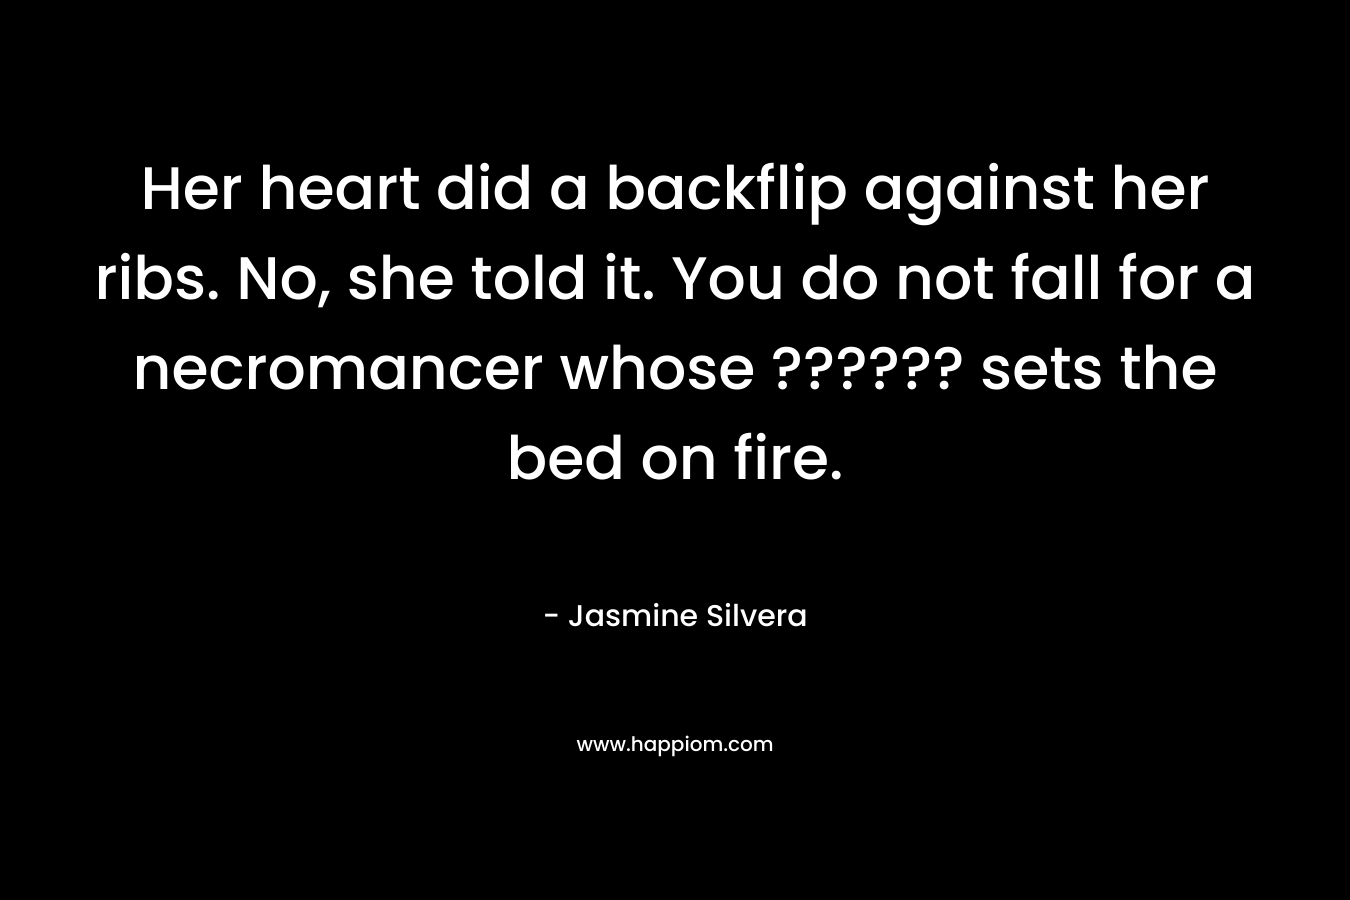 Her heart did a backflip against her ribs. No, she told it. You do not fall for a necromancer whose ?????? sets the bed on fire. – Jasmine Silvera